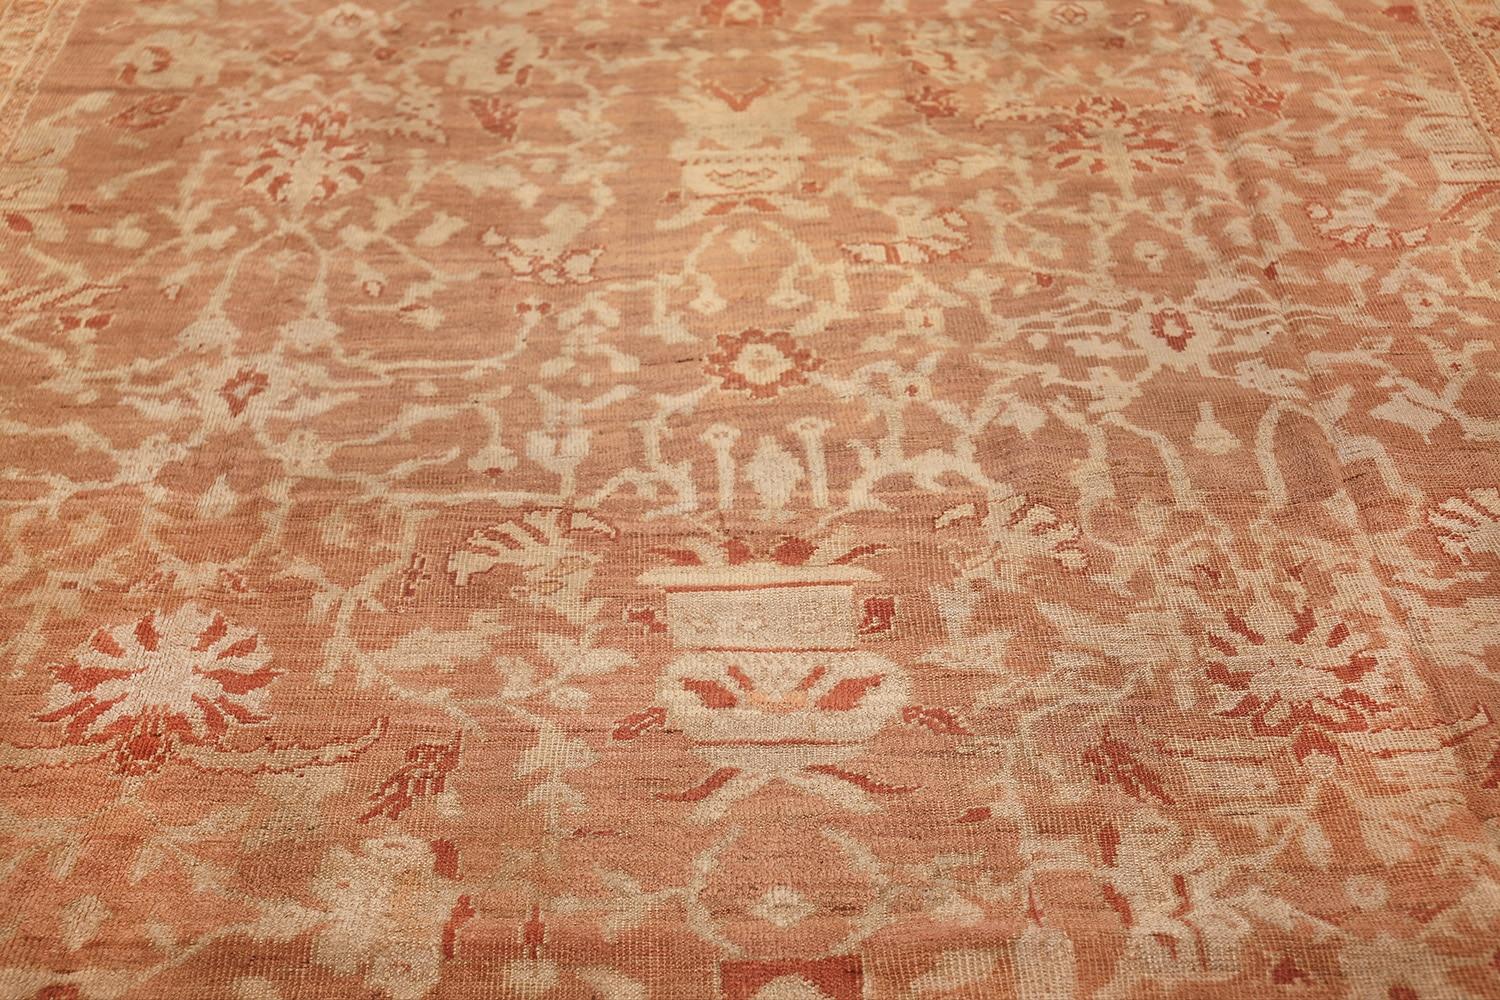 19th Century Decorative Antique Persian Ziegler Sultanabad Rug. Size: 11 ft x 15 ft For Sale